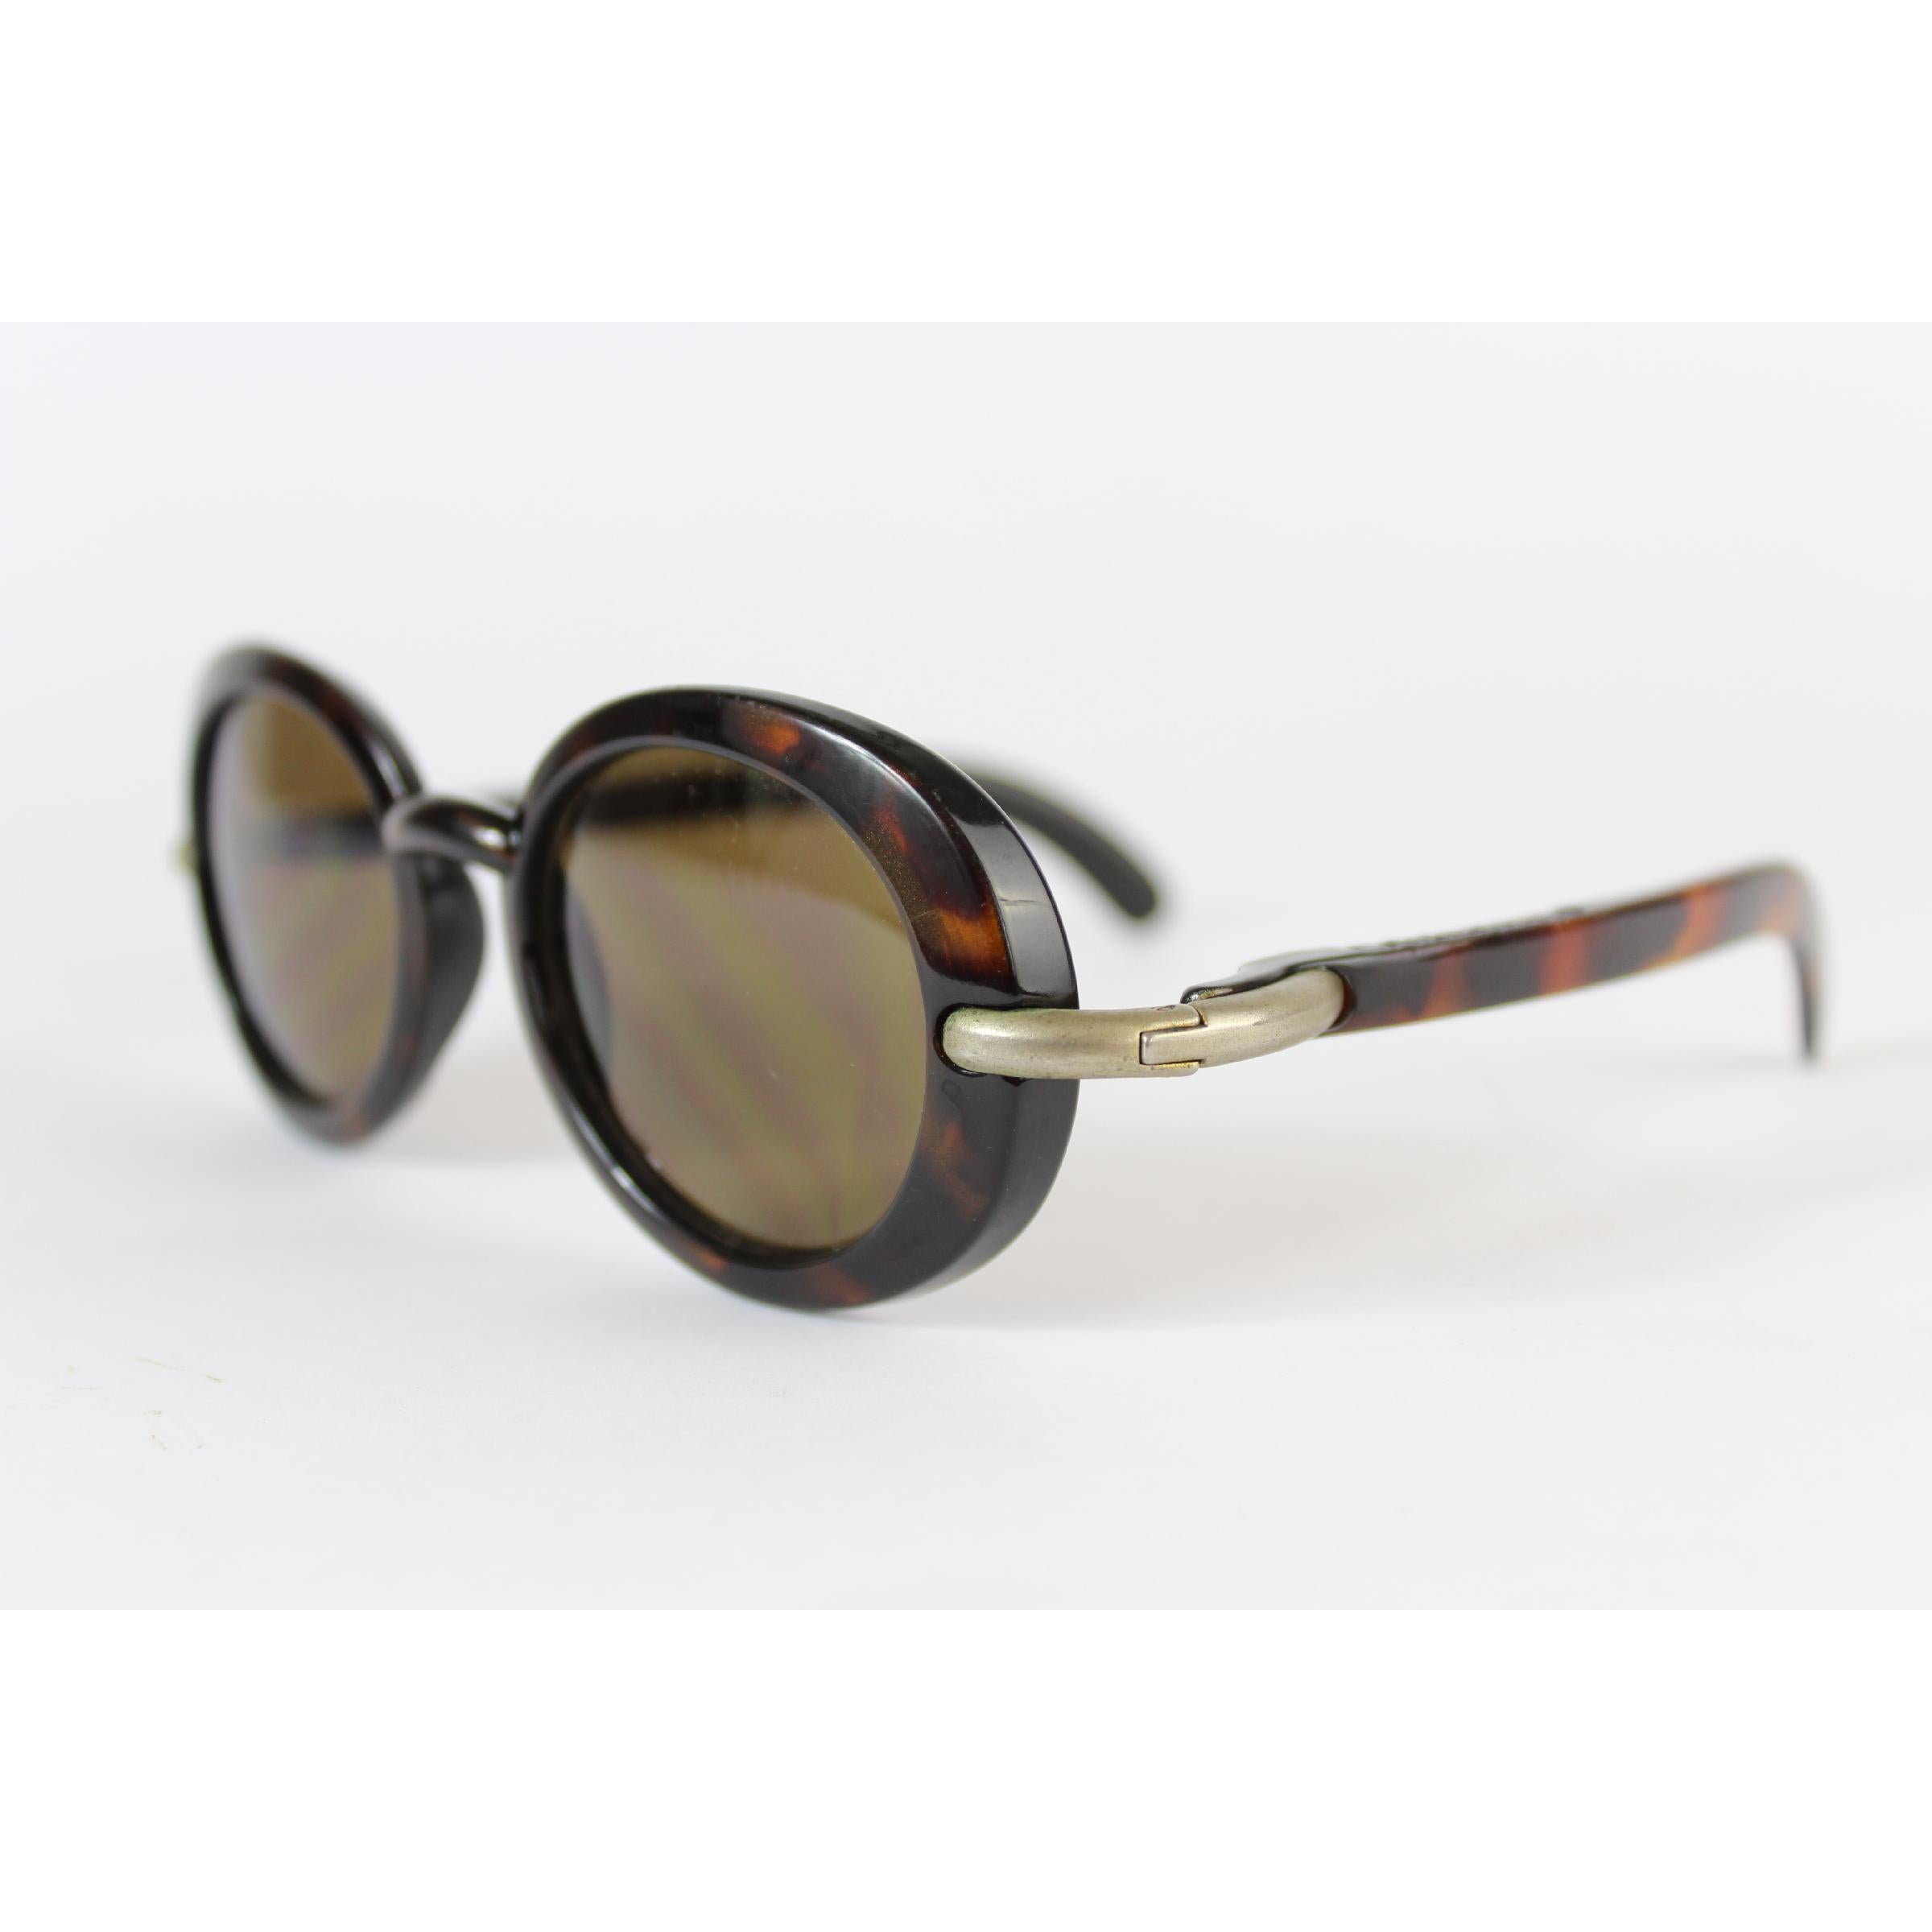 Karl Lagerfeld vintage women's sunglasses 90s. Round model, tortoise-brown color, PC Cridalon lenses. Made in France. The lenses have some little signs of use, in the whole the conditions are excellent. 
Presumably model: 411501, unfortunately it is